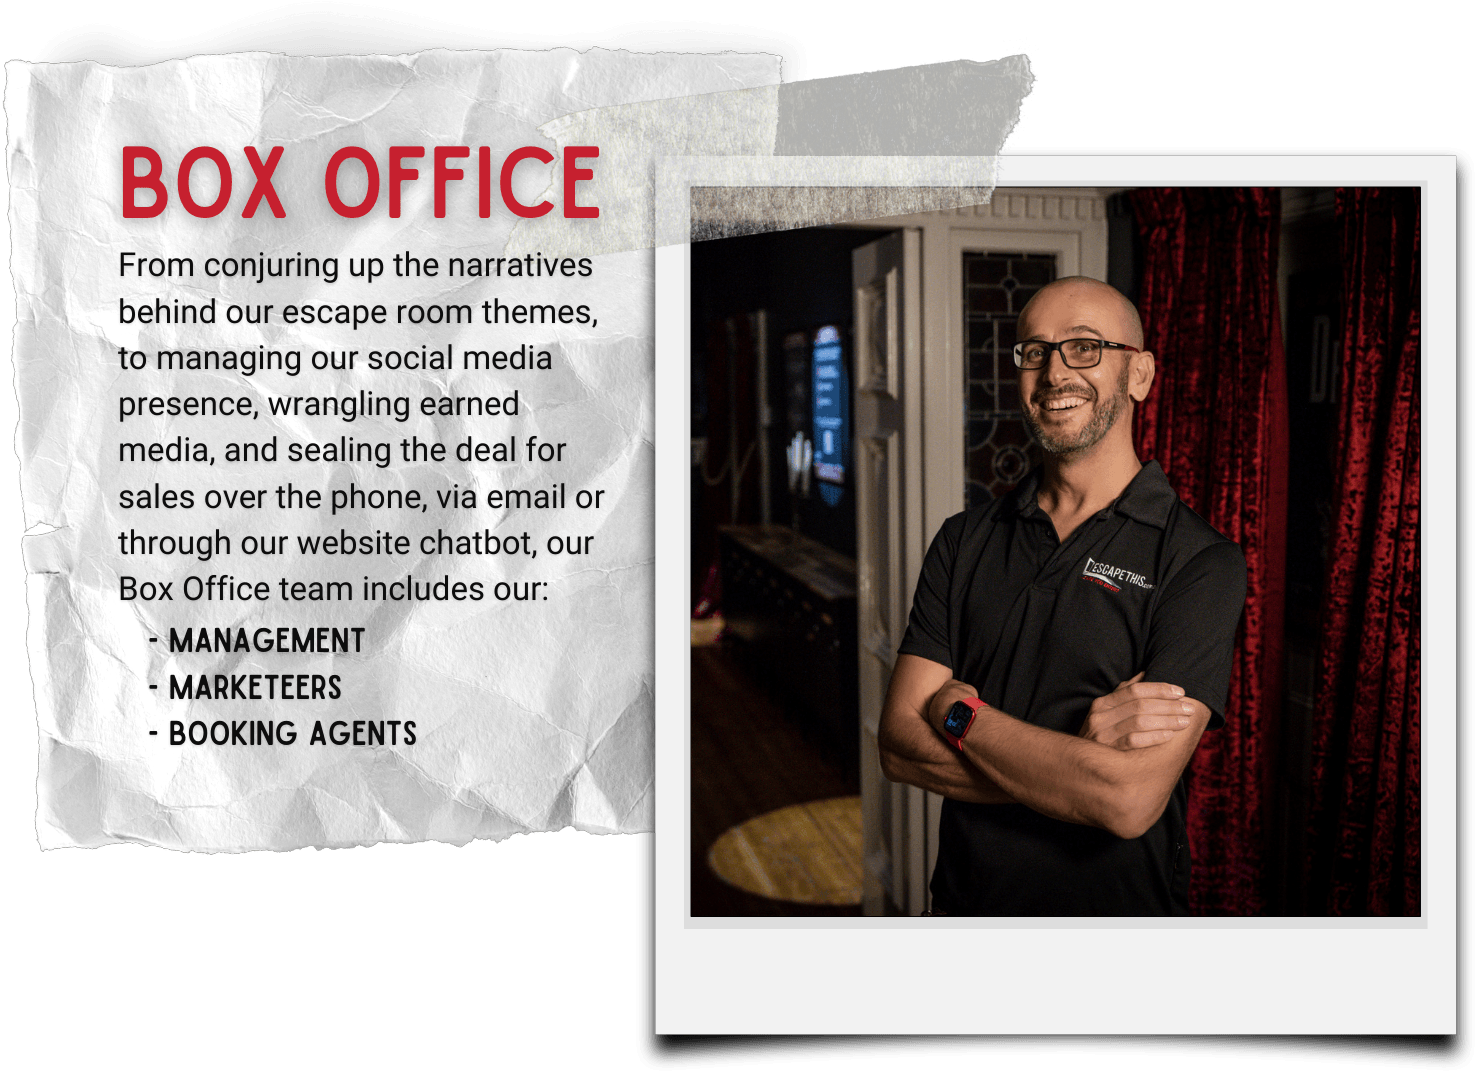 Escape This careers: escape rooms box office team